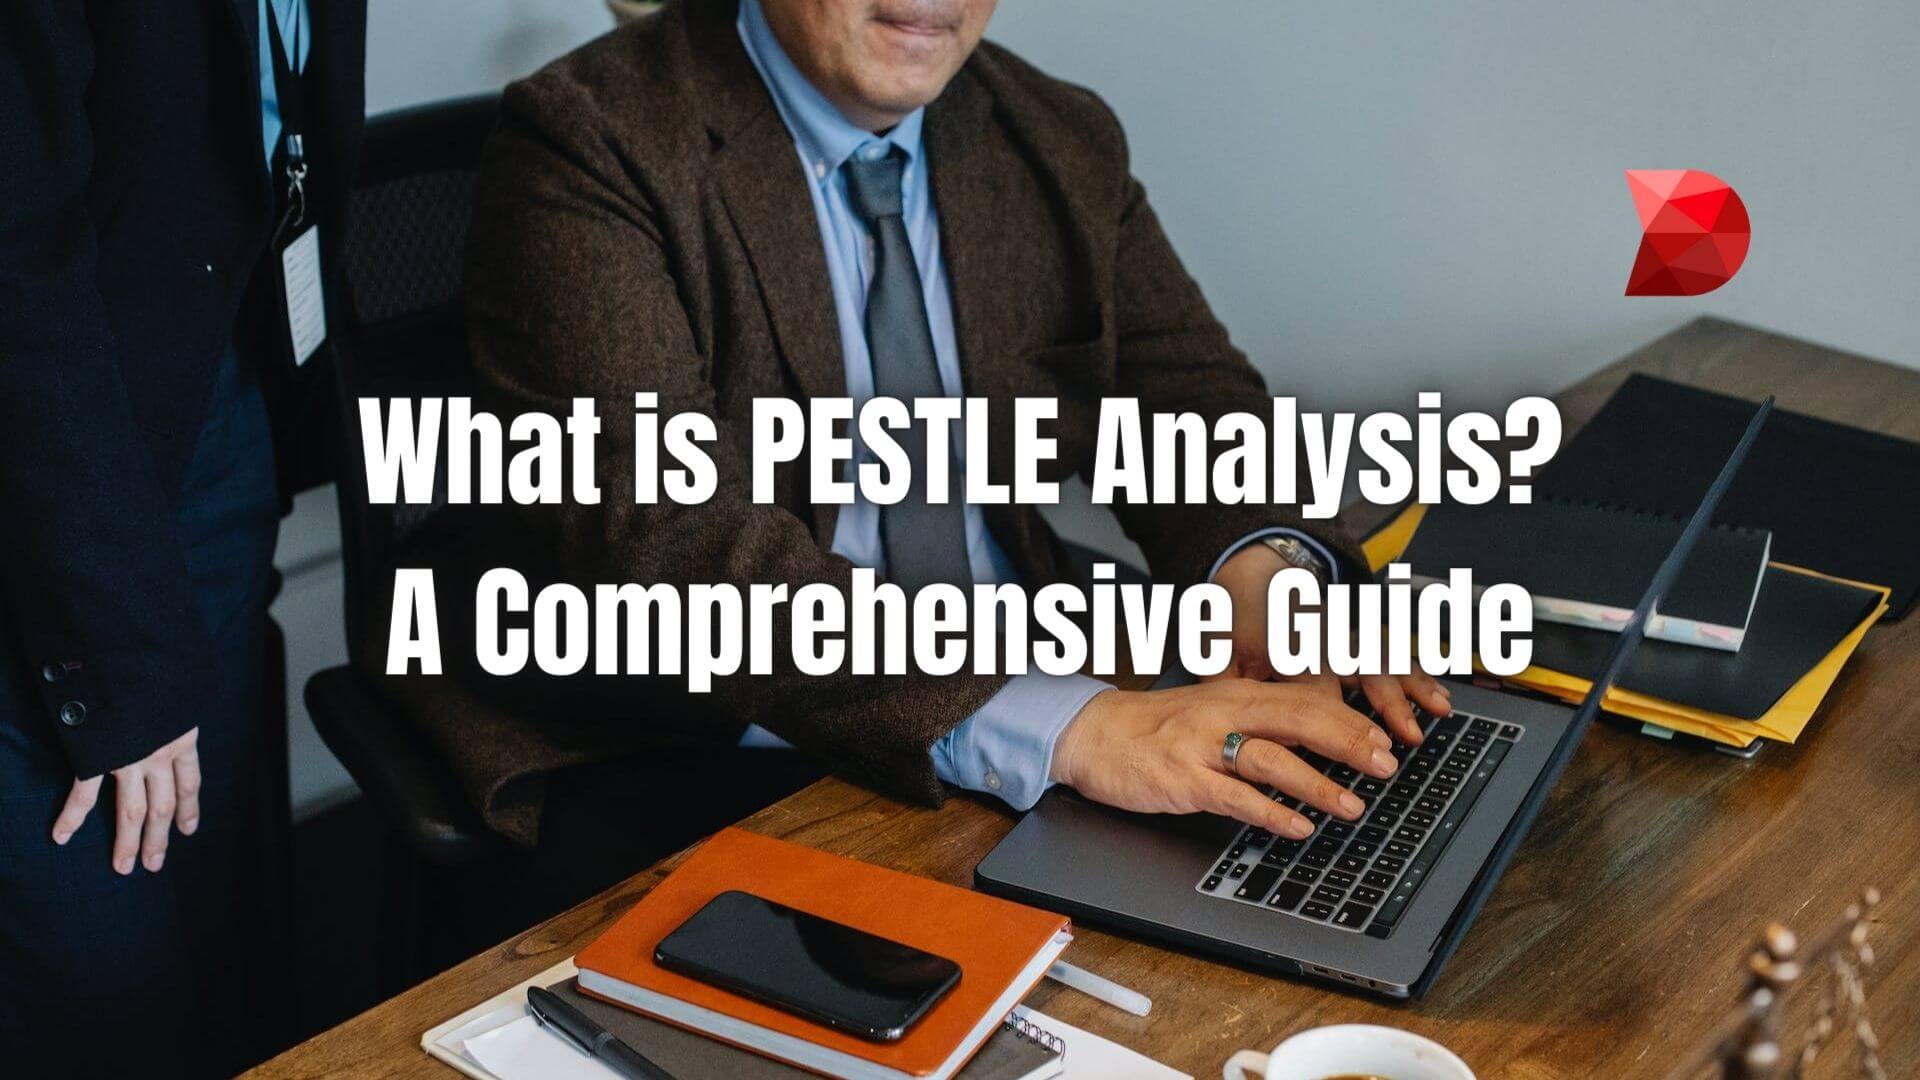 Navigate business landscapes effortlessly with our PESTLE Analysis template guide. Click here to gain a competitive edge today!